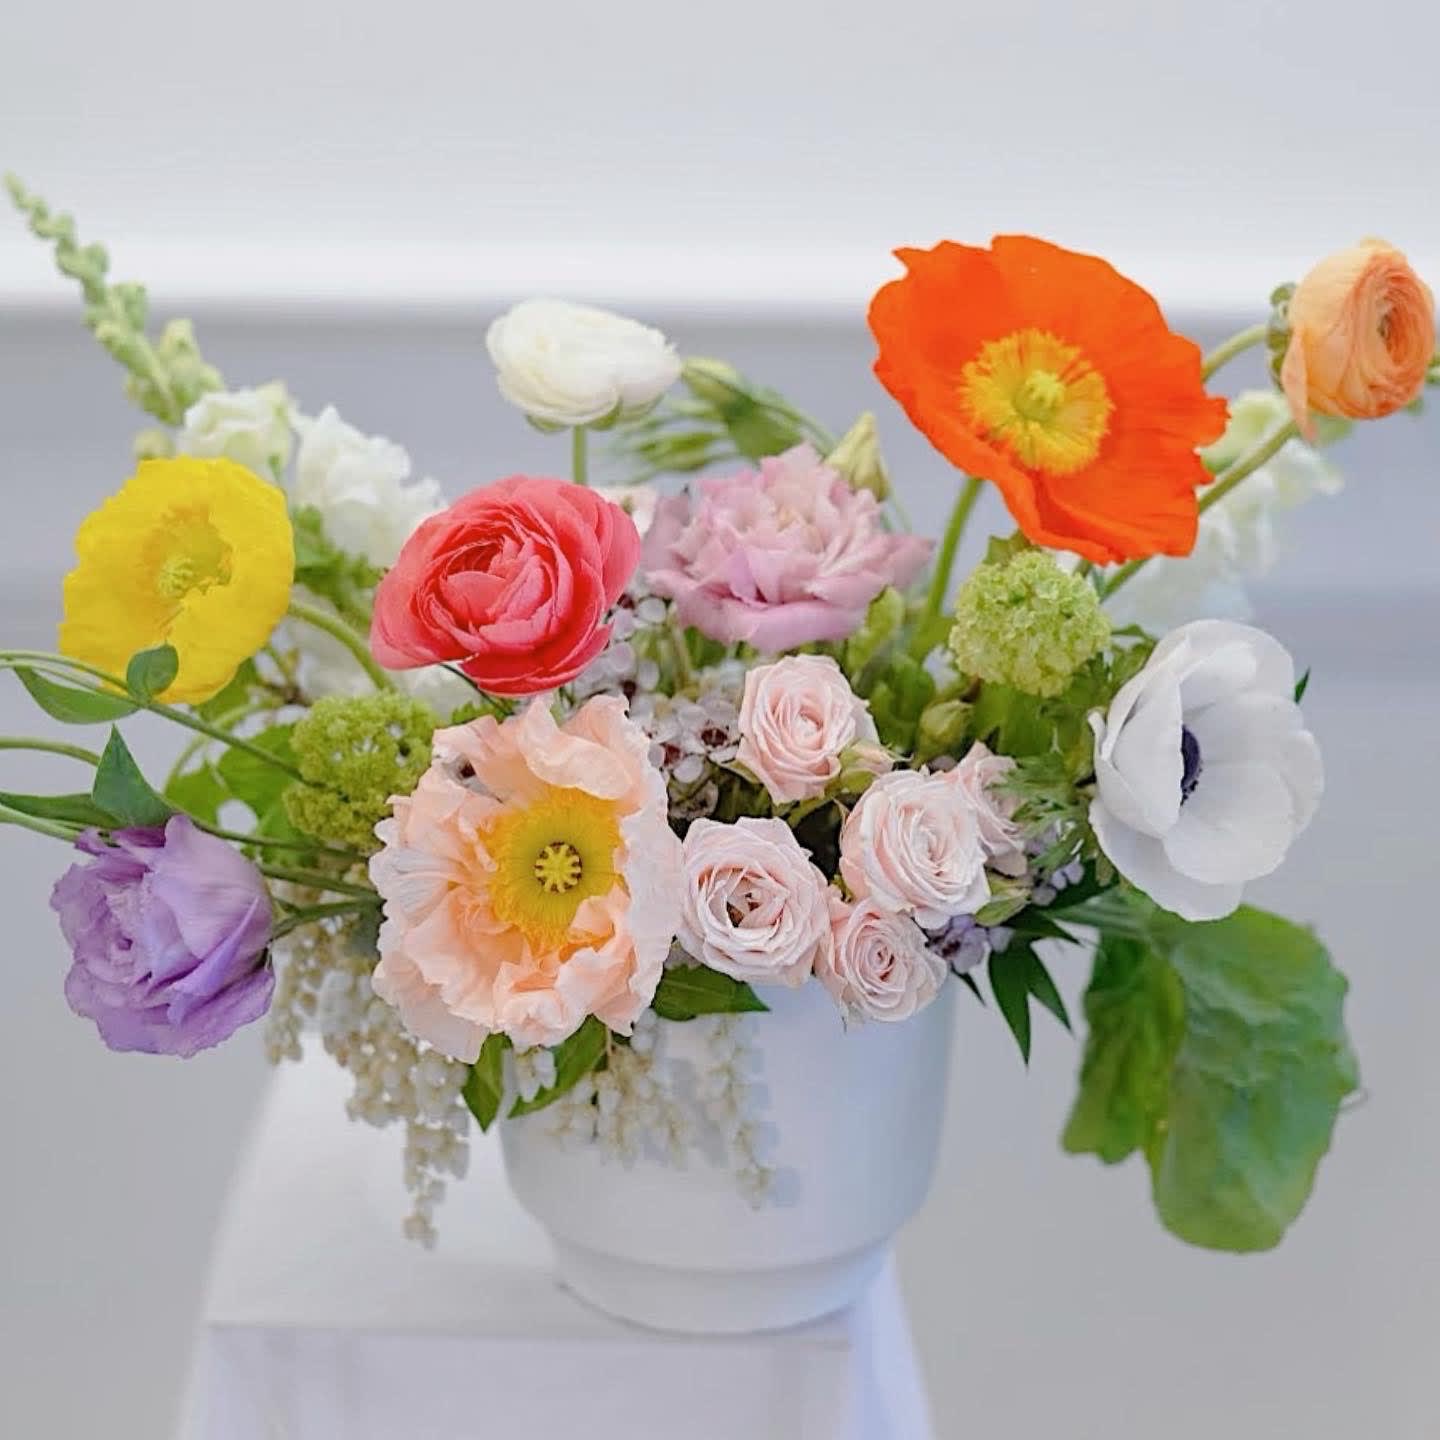 Spring Garden - Spring flowers hand selected by our designers to give you the absolute best of the season. Arranged in a keepsake pot or planter, in a natural and free-flowing style to mimic the most exquisite botanical gardens. Every arrangement will be completely unique, but it will be designed in the style shown, with punchy colors and a mix of blooms.  The blooms used may vary by the season and availability, and since each arrangement is custom-made to order by our talented designers, they will all look slightly different, which is what makes them so special!  The photo is a representation of the overall vibe of this Botanique signature arrangement. 